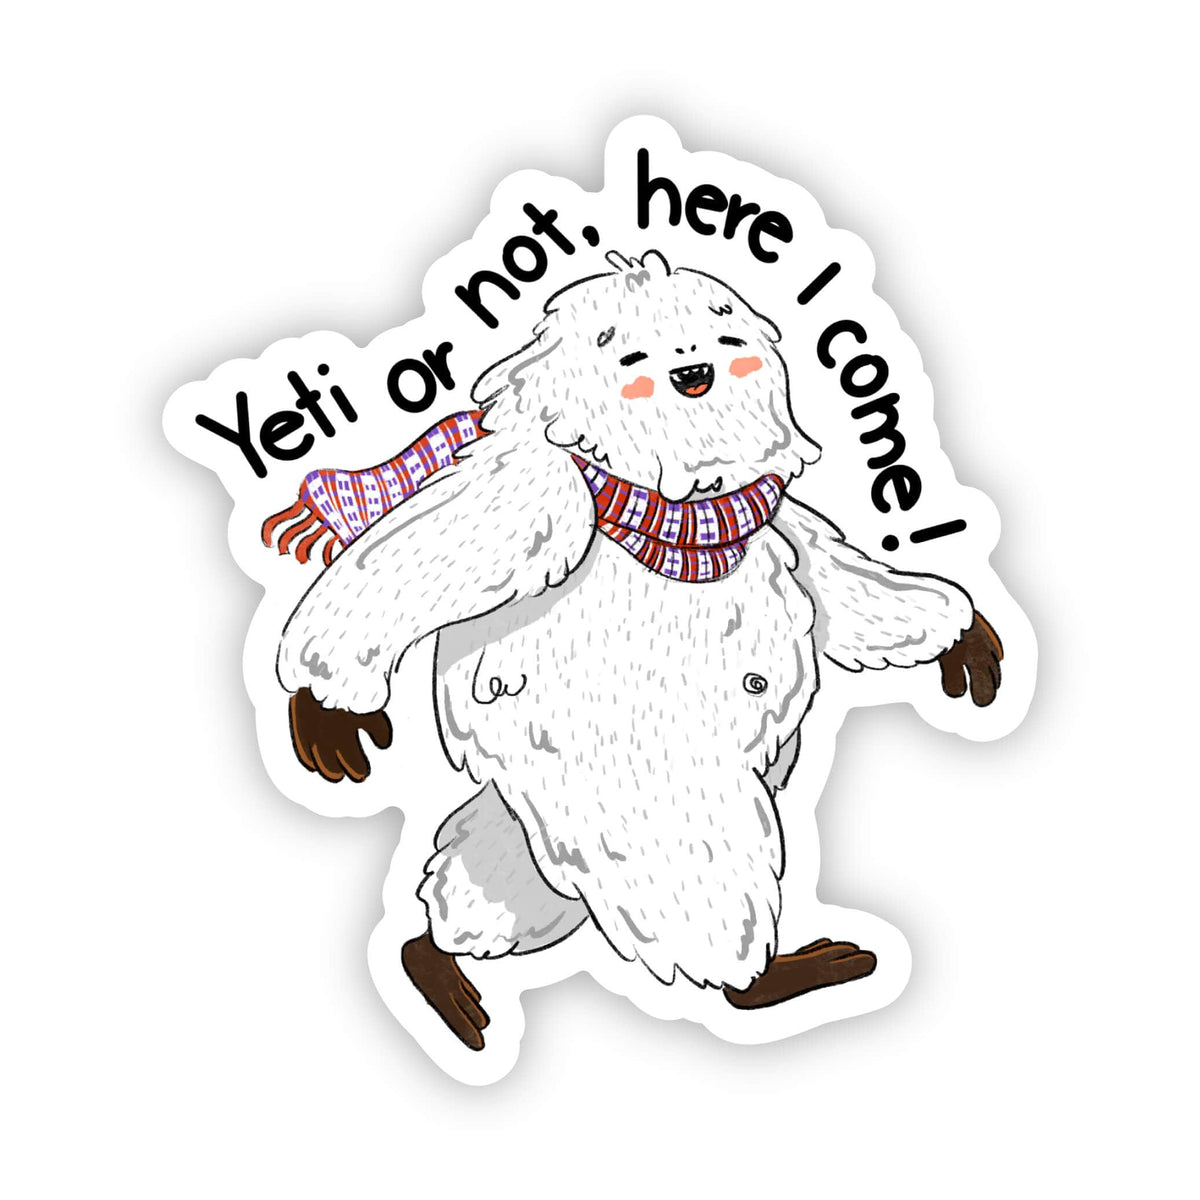 Yeti or not, here I come sticker